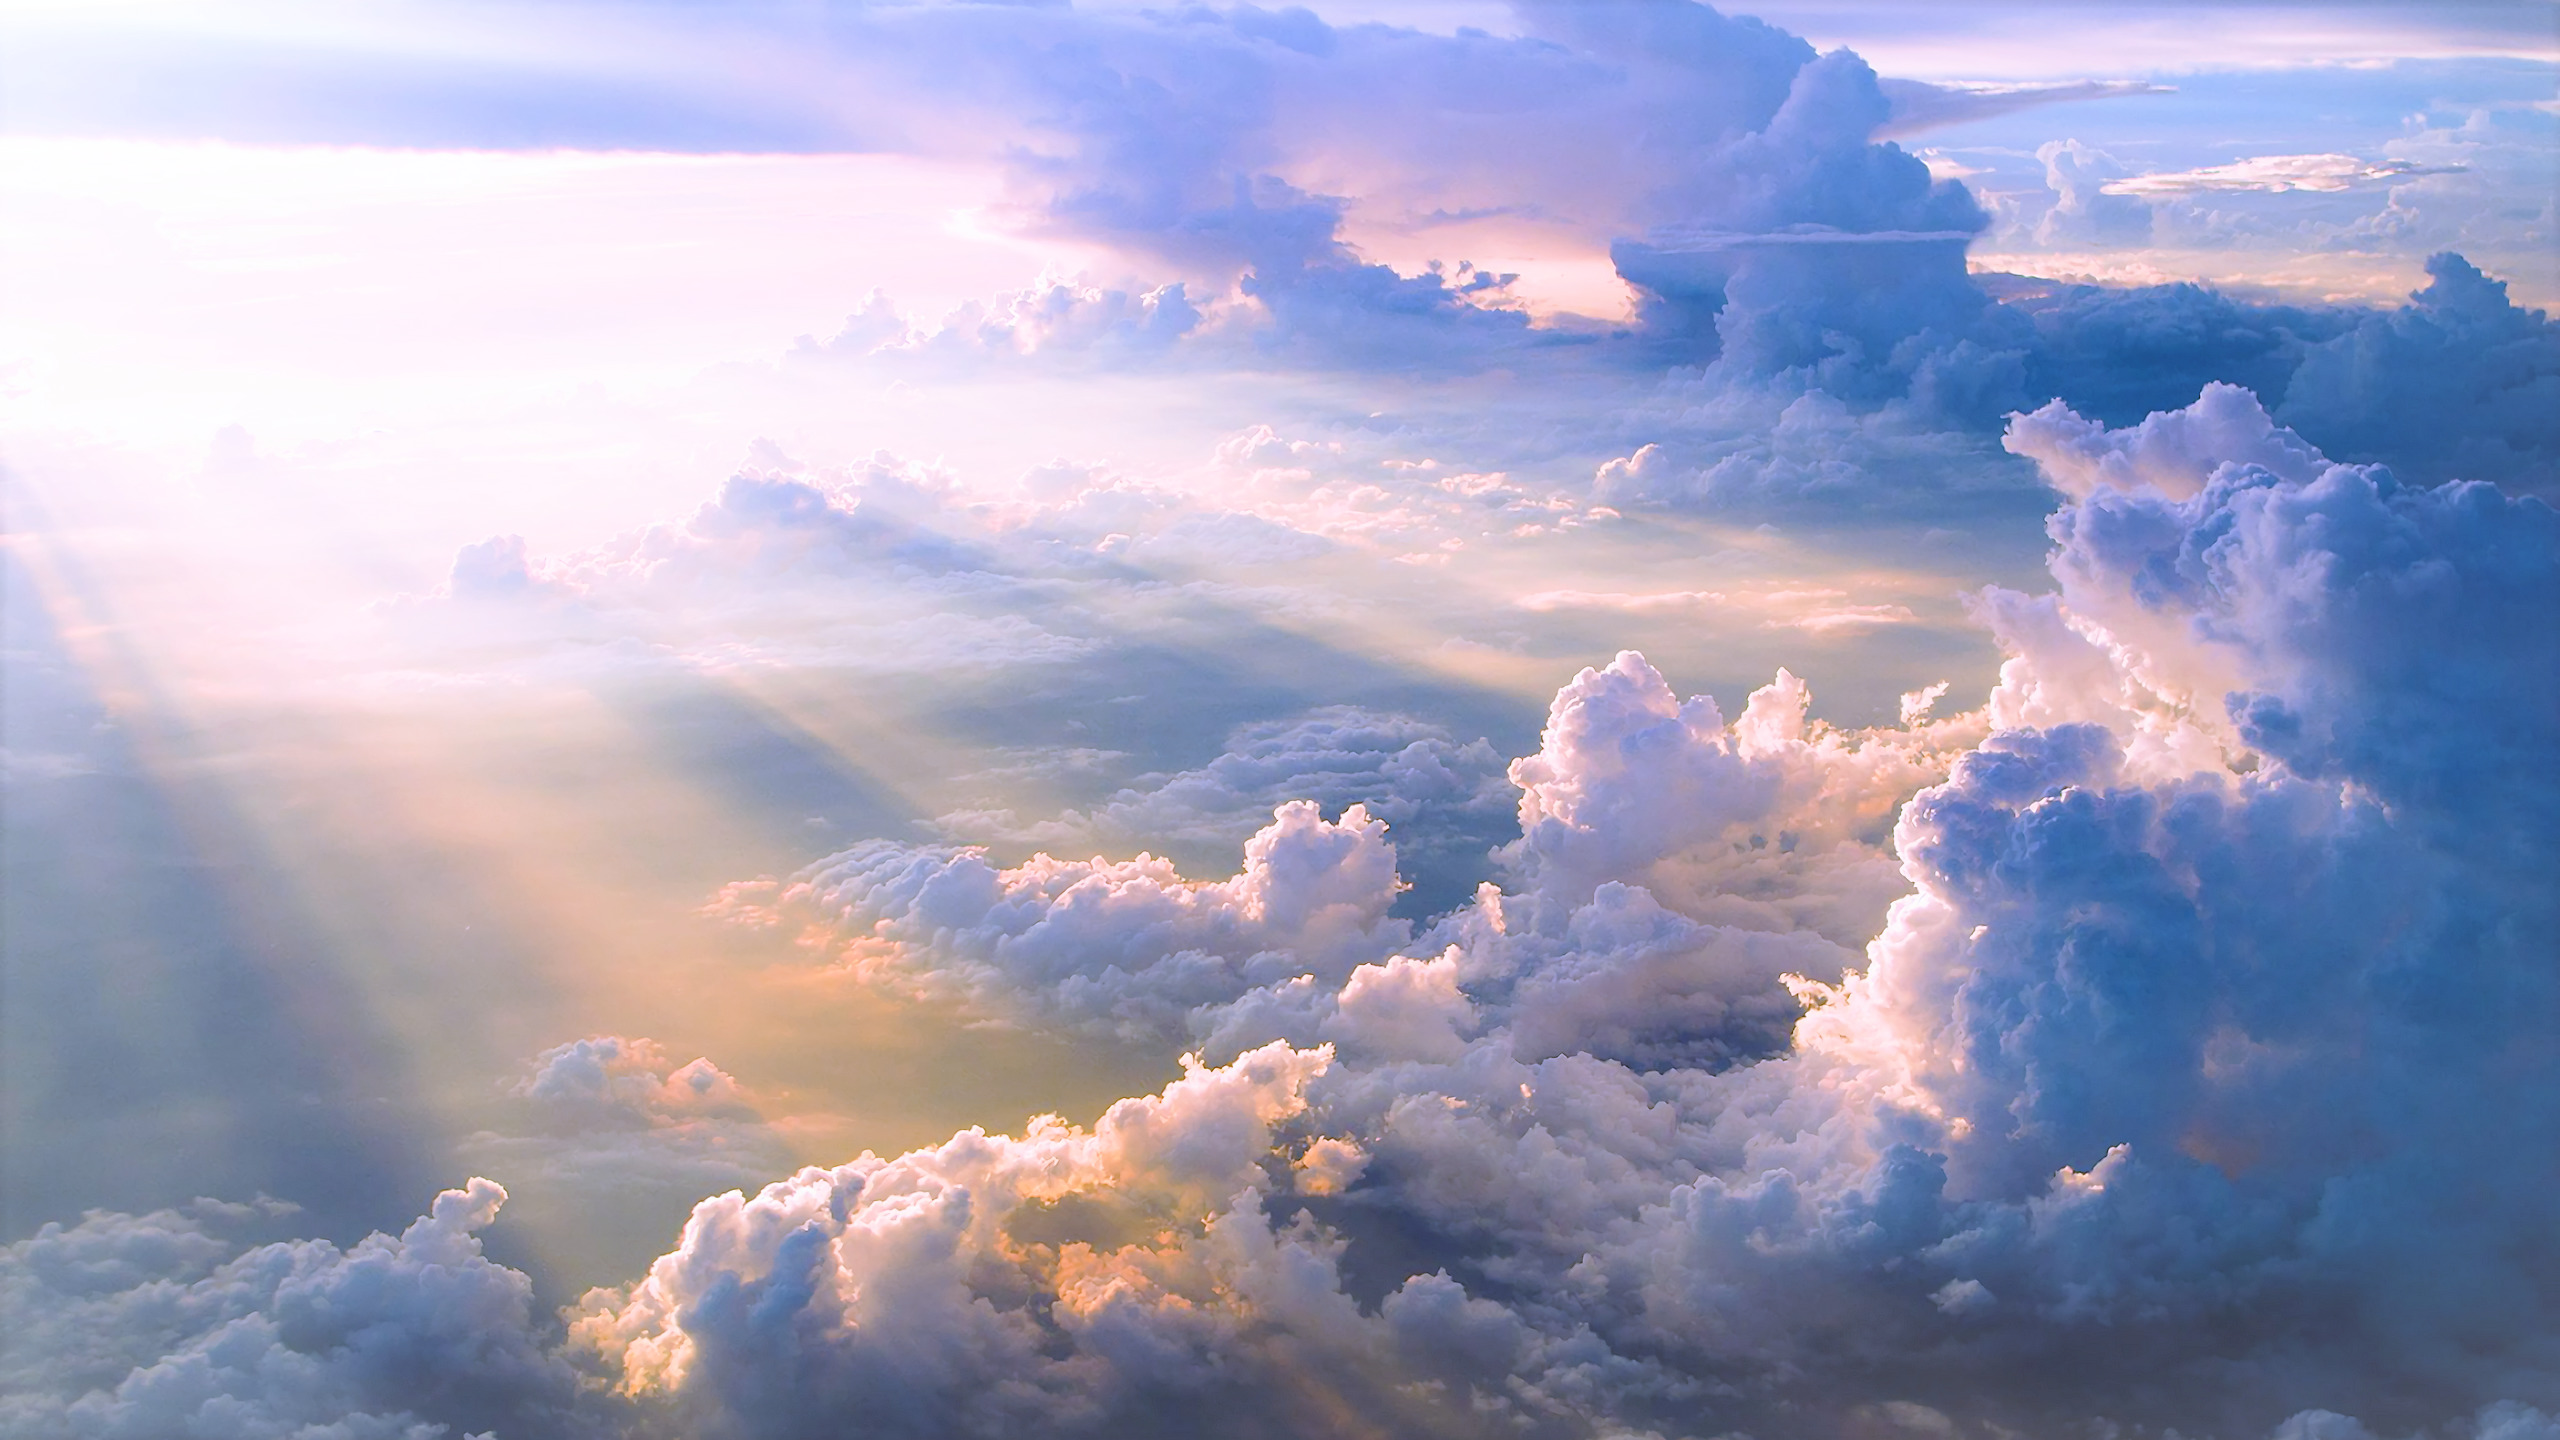 Sky Wallpapers Hd Desktop Backgrounds Images And Pictures Sky Photos Images